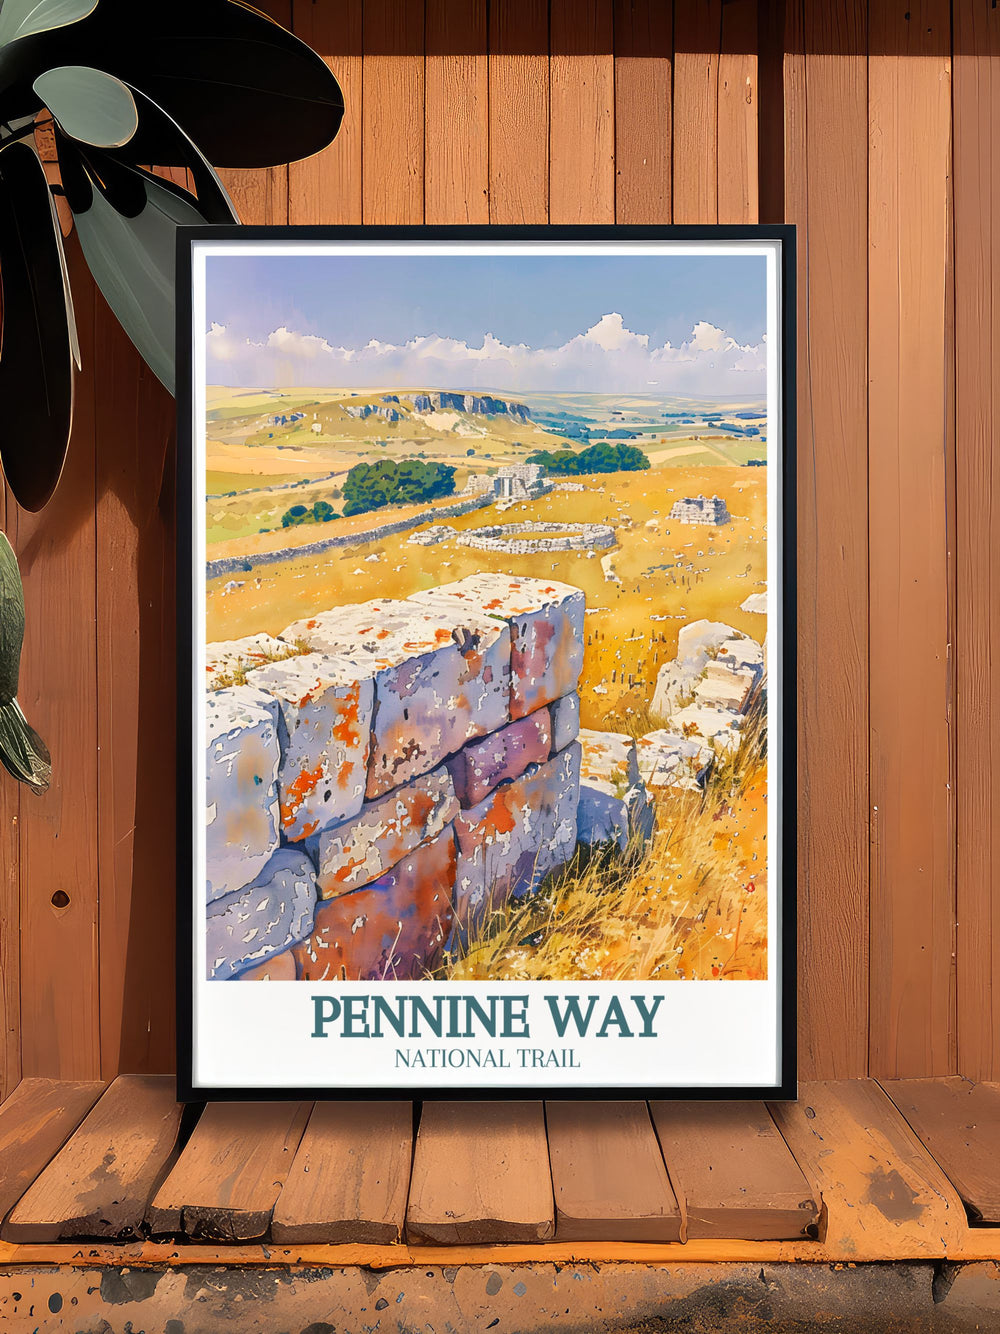 National Park Print featuring the serene vistas of the Pennines perfect for those who appreciate British natural heritage and the stunning scenery of the Yorkshire Dales